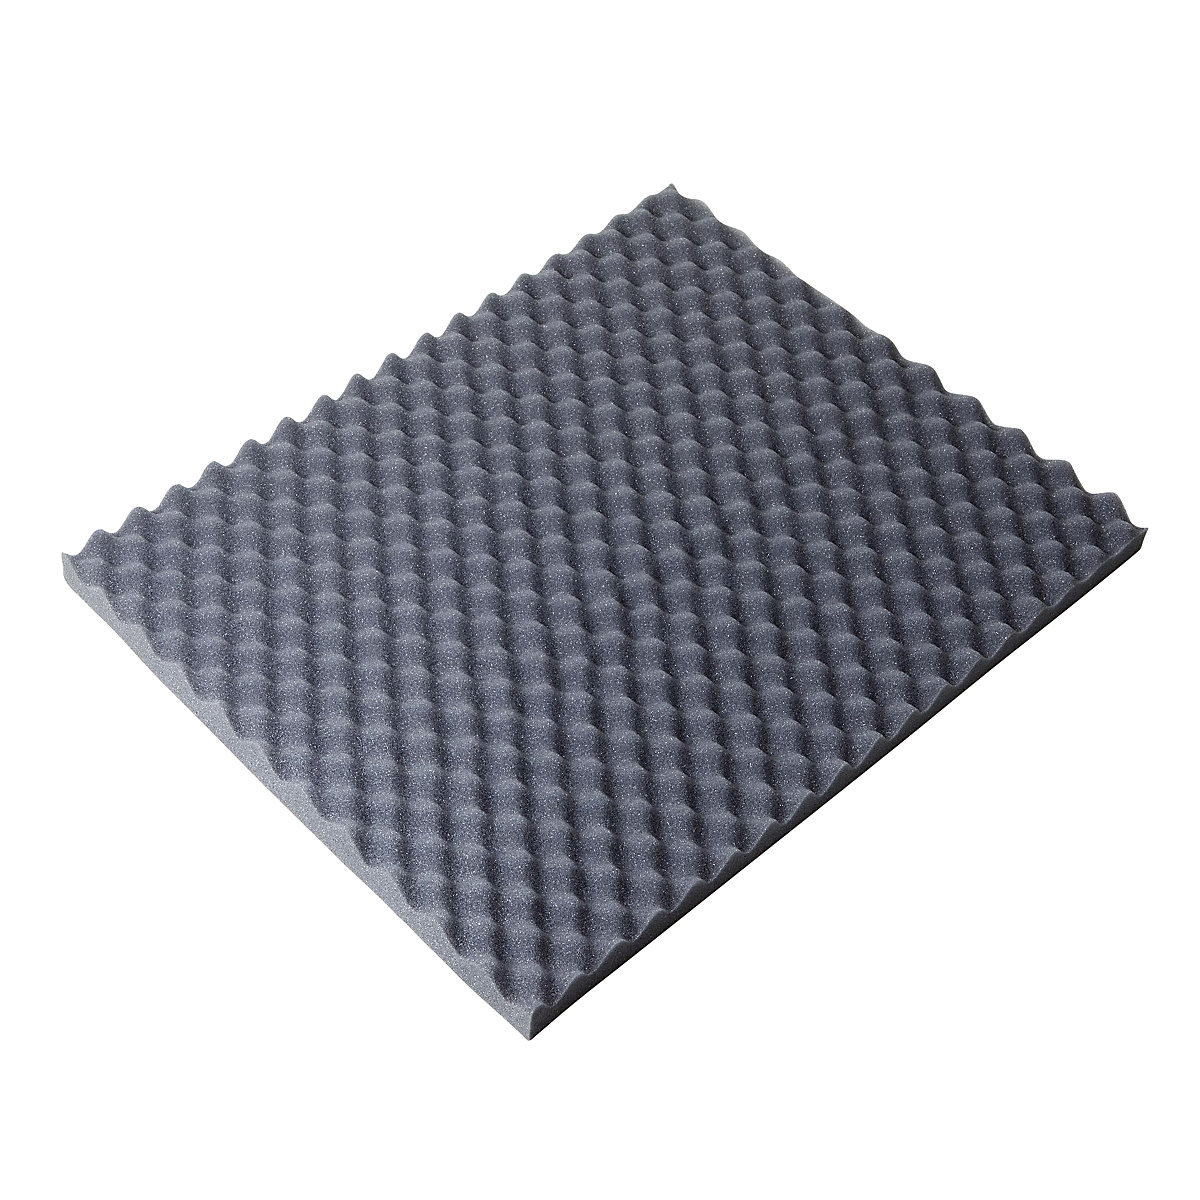 Egg crate foam sheet, 30 mm thick, LxW 500 x 400 mm, pack of 26-7